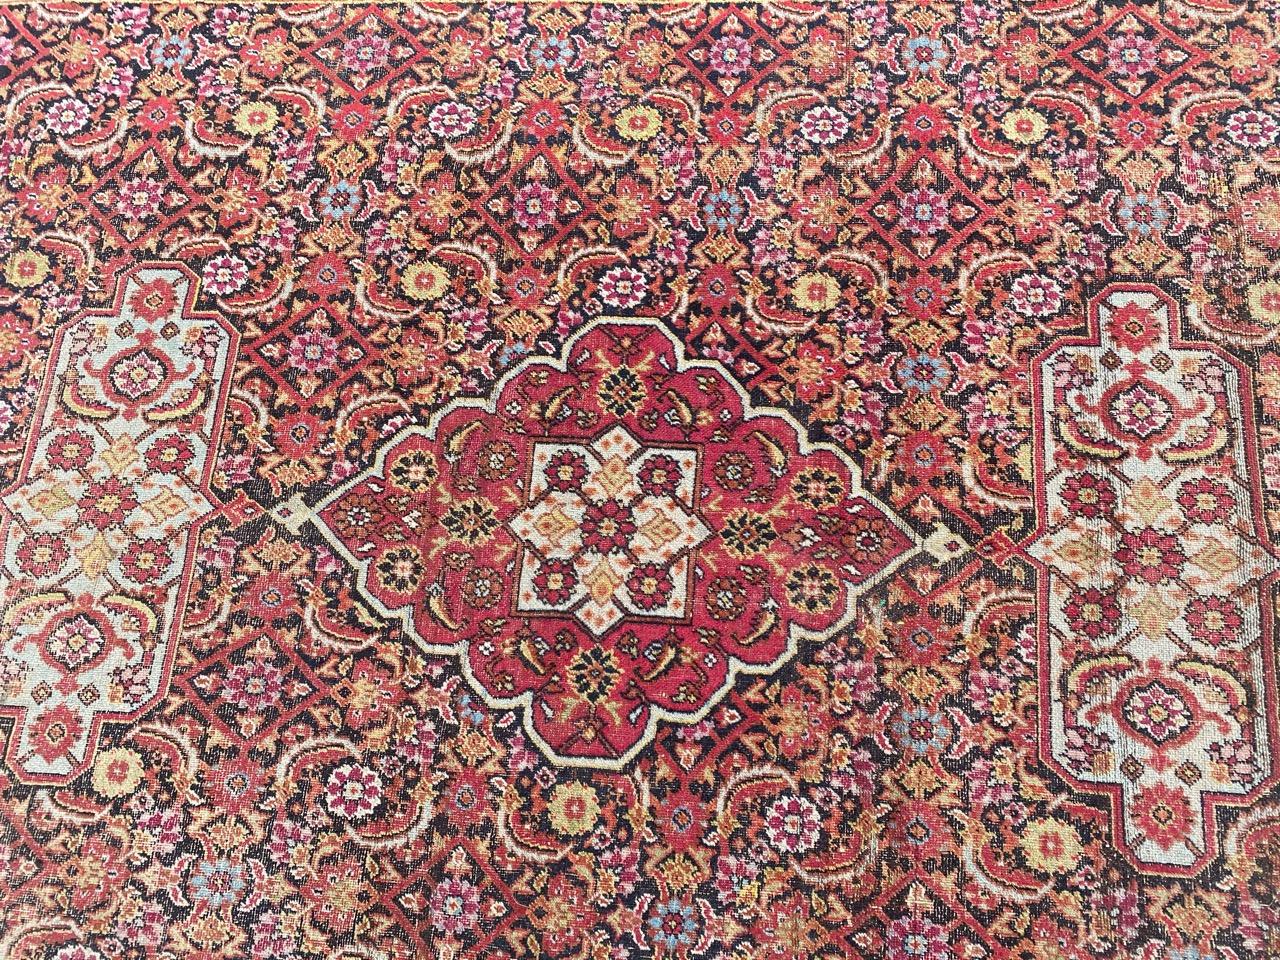 Very beautiful and old Dorokhsh khorassan rug with a nice and decorative design And beautiful natural colors, entirely hand knotted with wool velvet on cotton foundation.

✨✨✨
